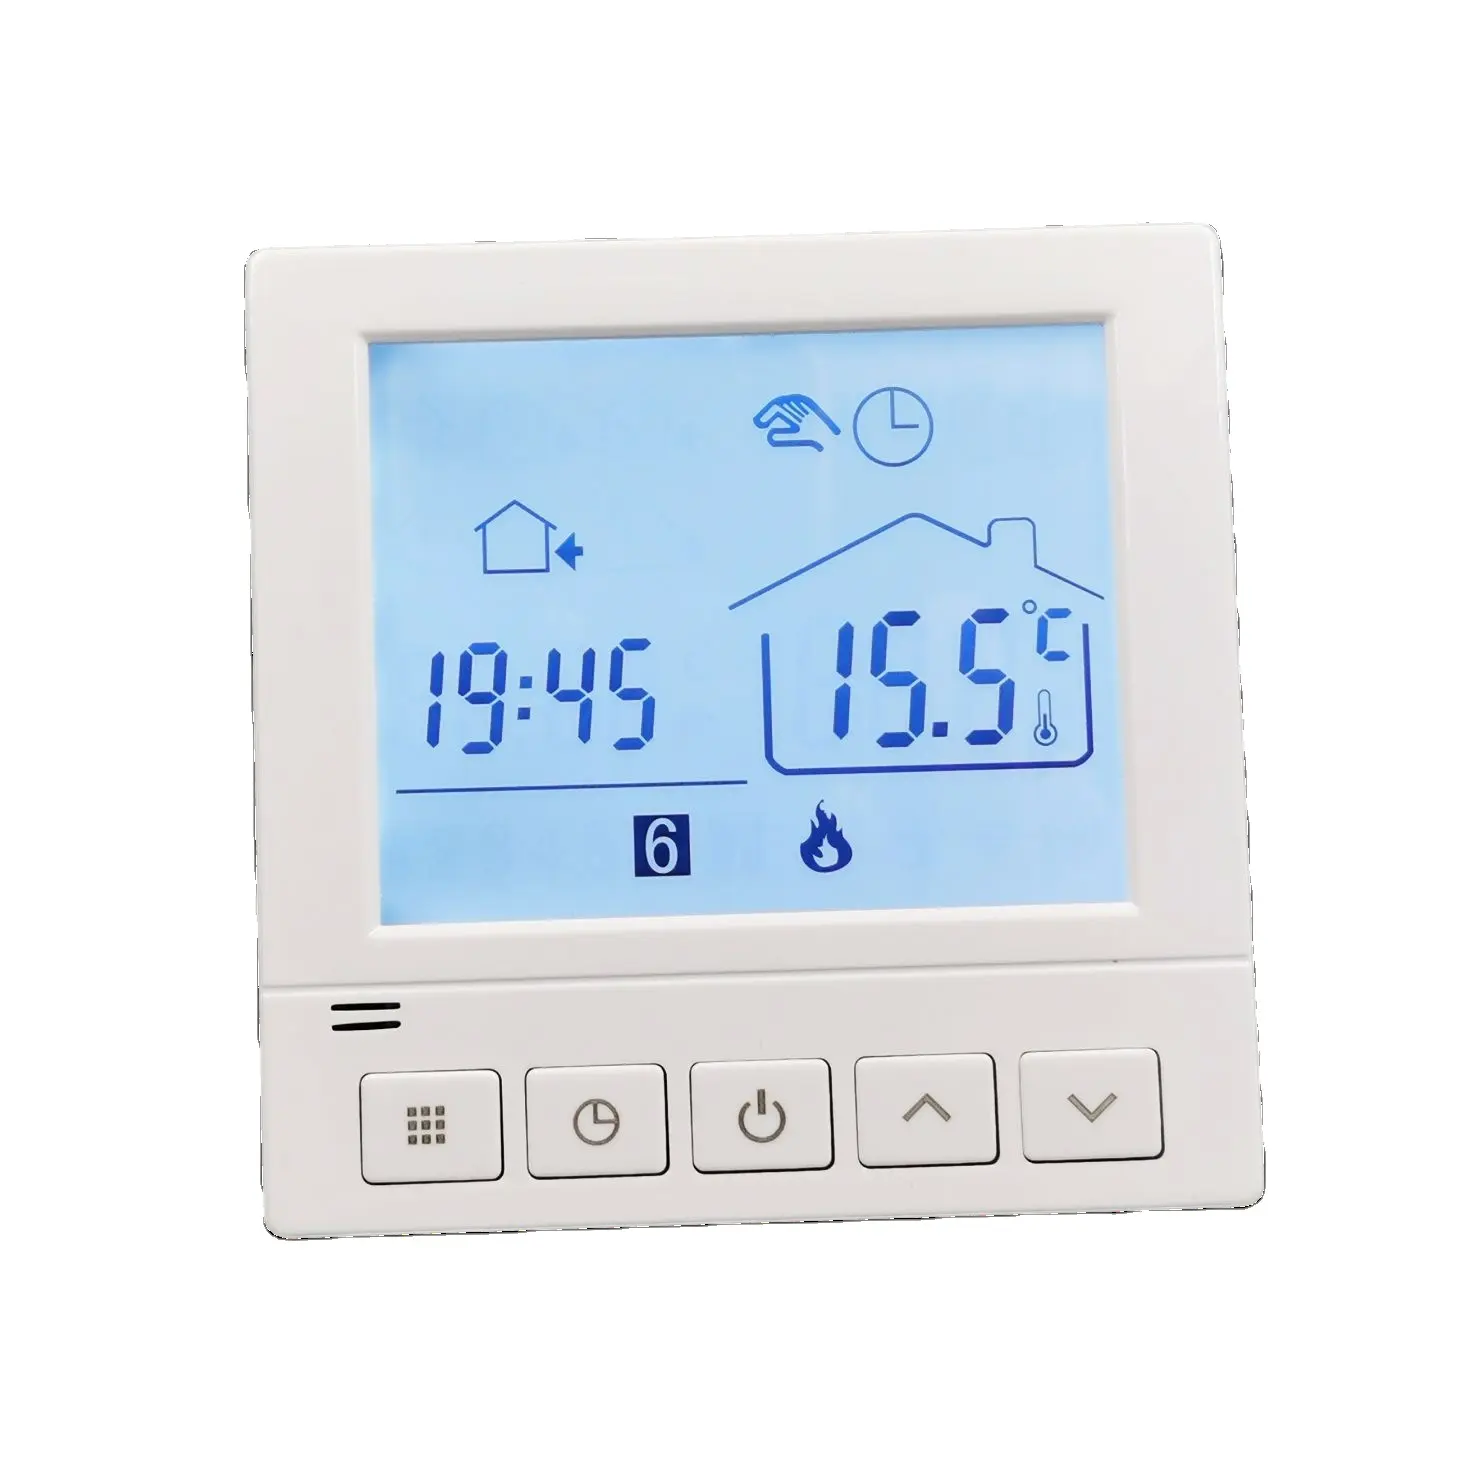 Thermostat intelligent Tuya Smart Home Chauffage par le sol Thermostat WIFI Thermostat électrique de chauffage par le sol